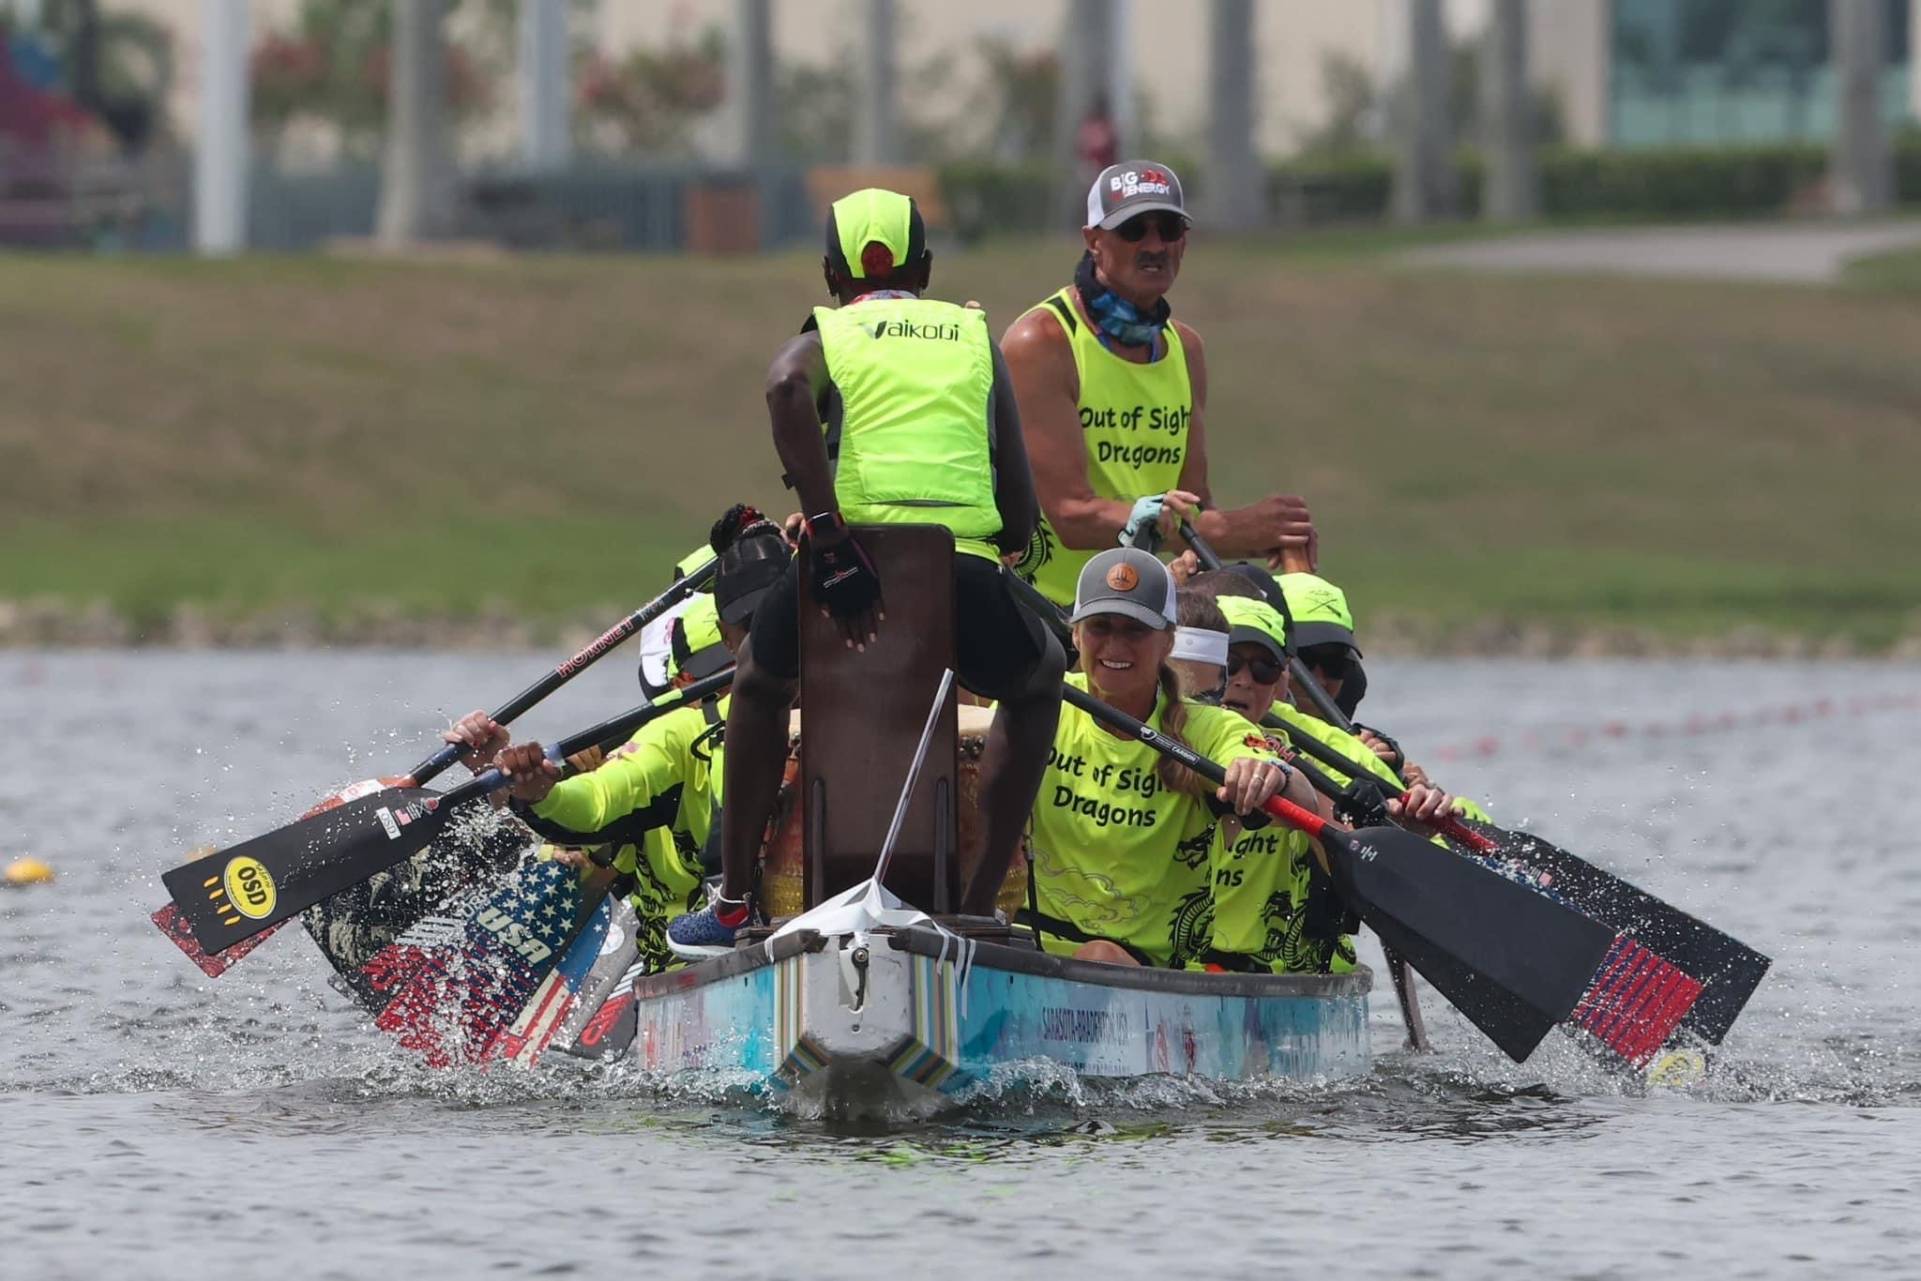 Out of Sight Dragons racing at the Club Crew National Championships 2023 in Sarasota, Floridia